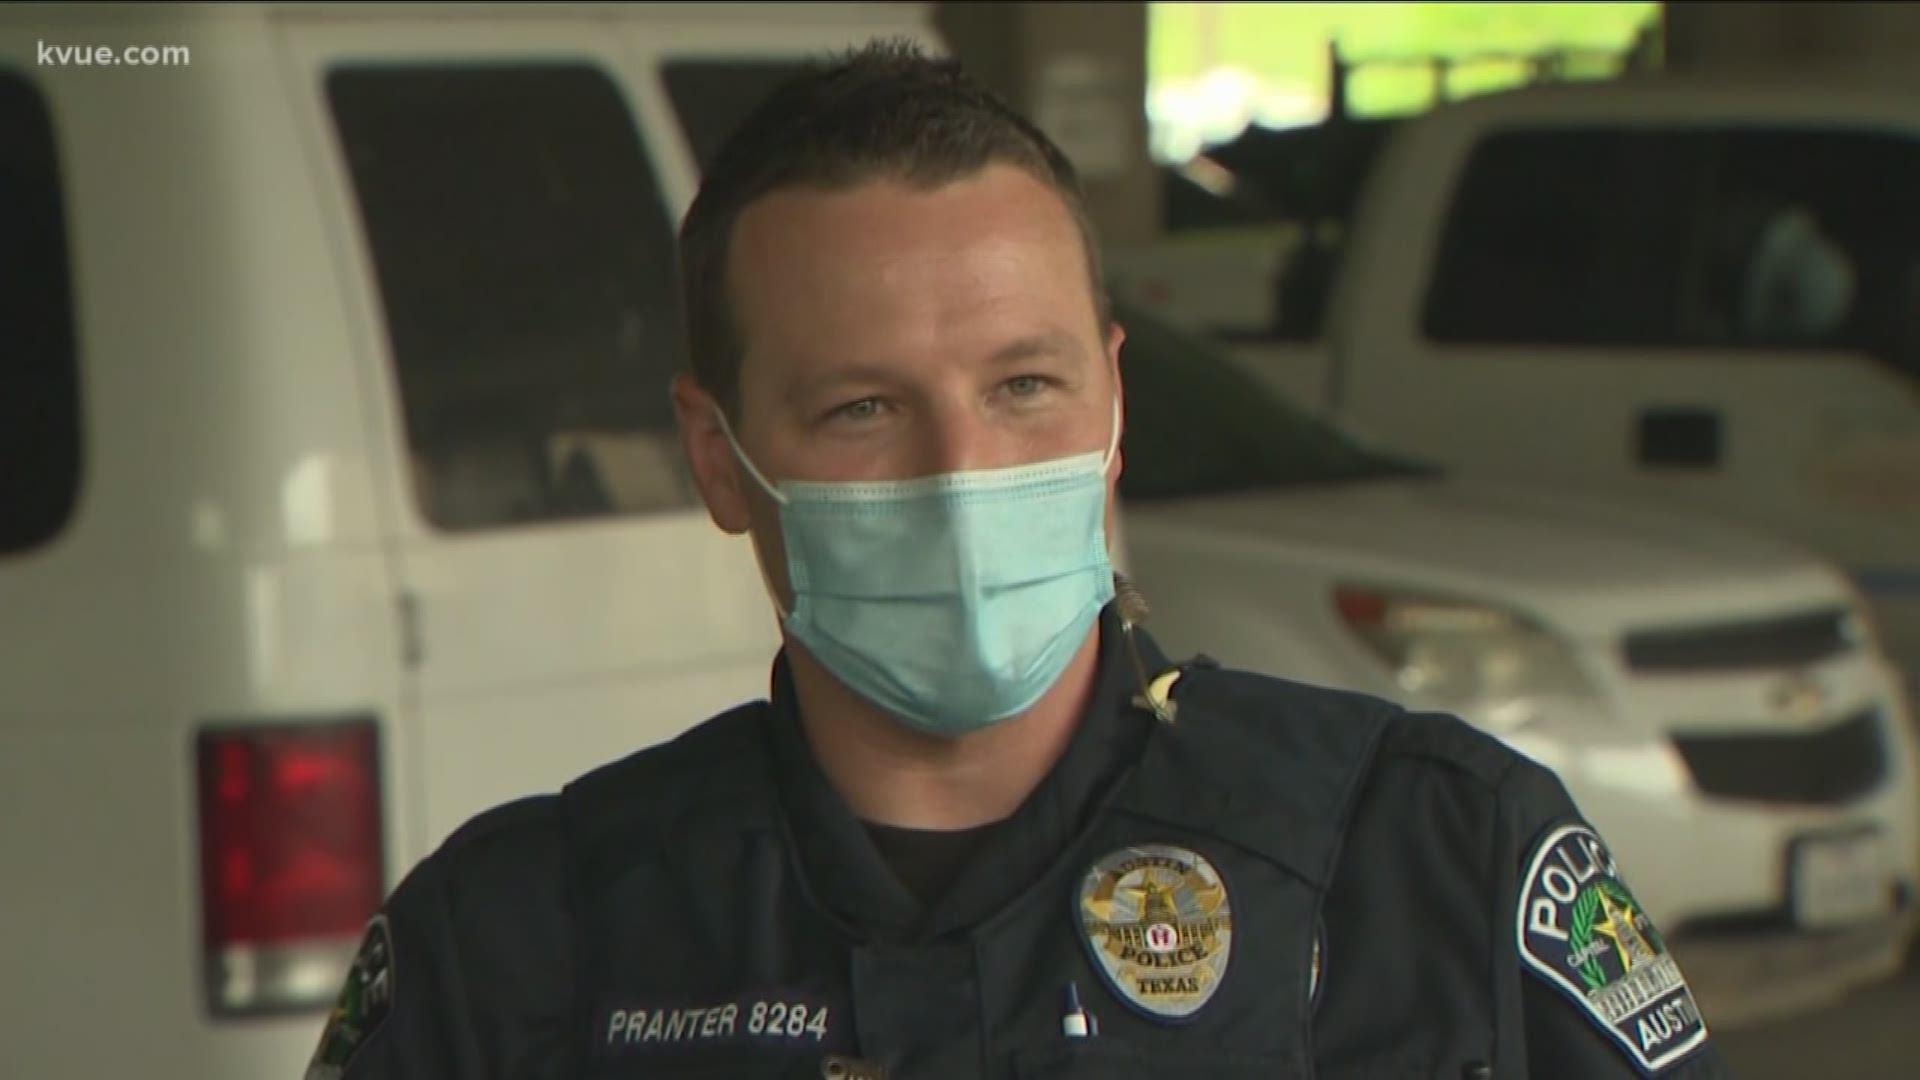 An Austin police officer who contracted COVID-19 is talking about what it was like to have the virus.